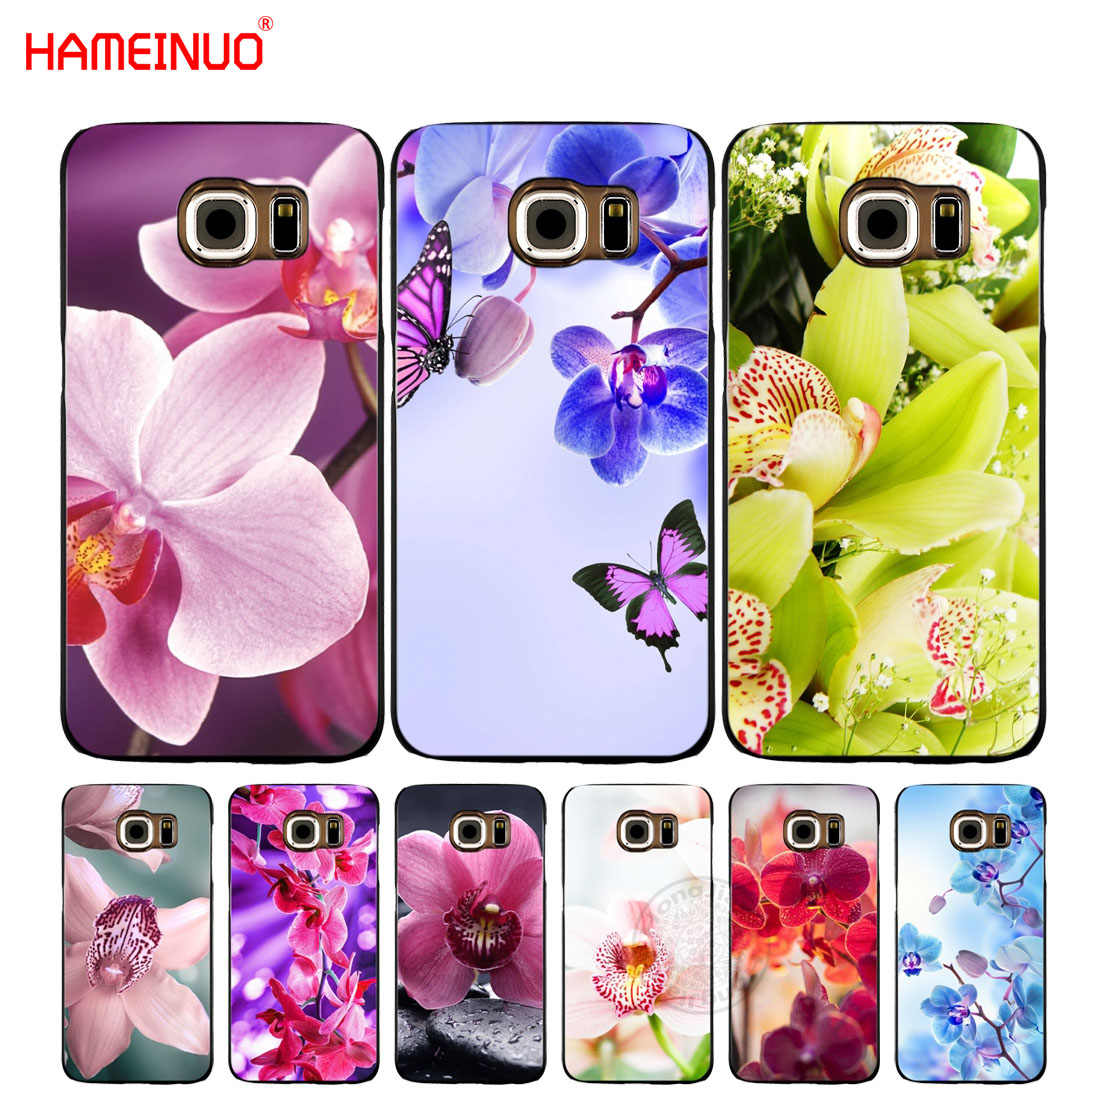 Hameinuo Desktop Wallpapers Free Orchids Cell Phone - Mobile Phone - HD Wallpaper 